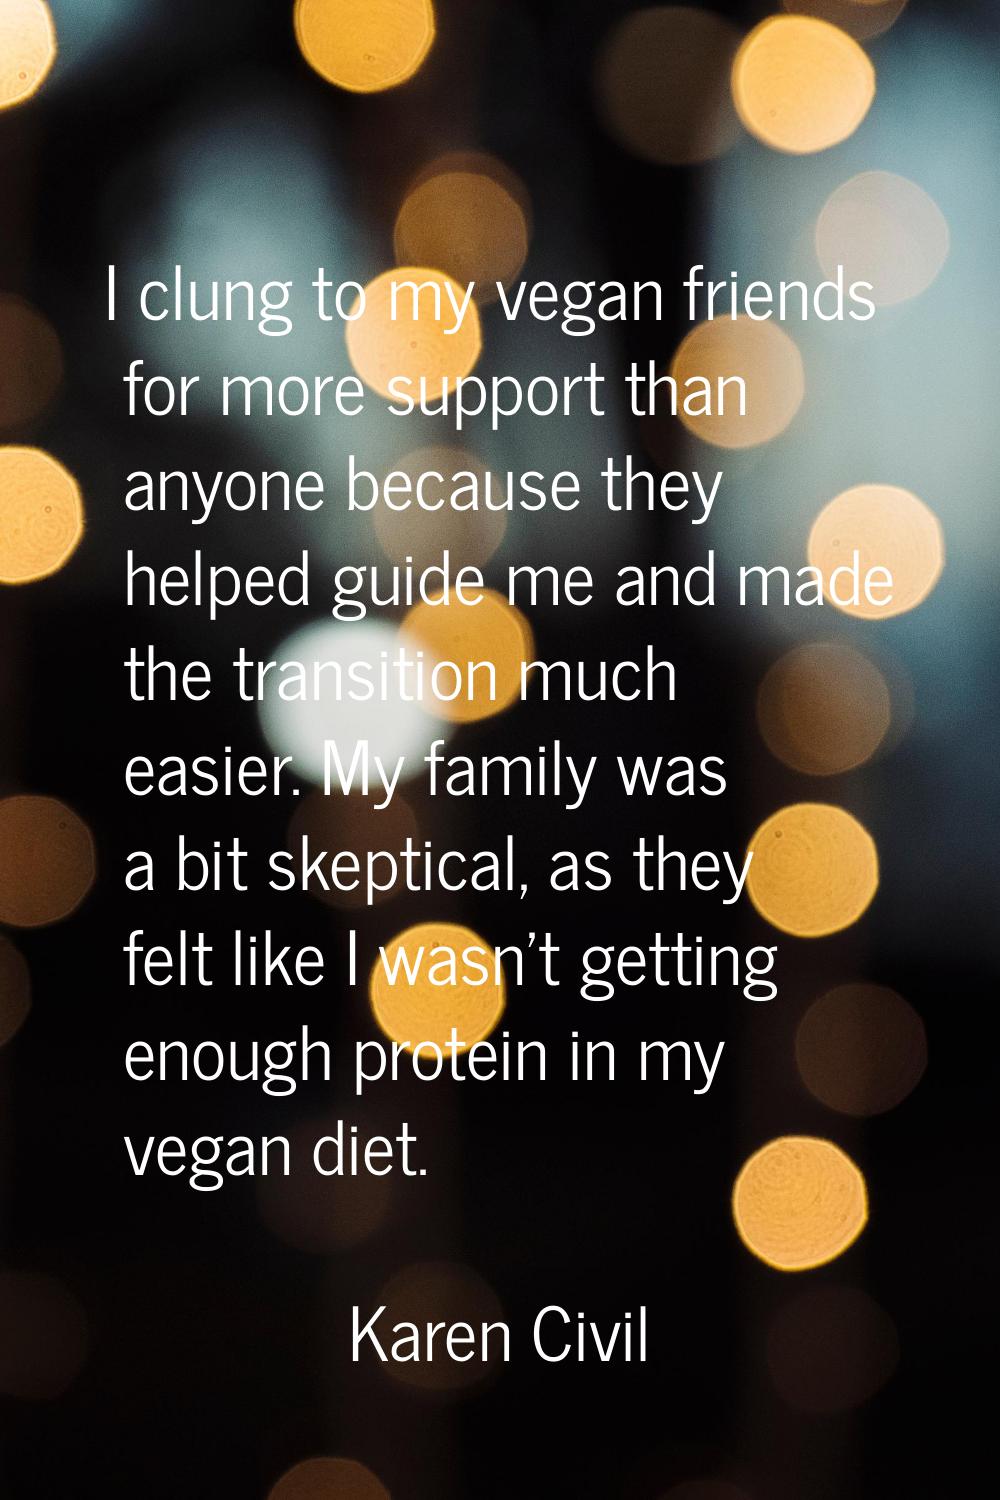 I clung to my vegan friends for more support than anyone because they helped guide me and made the 